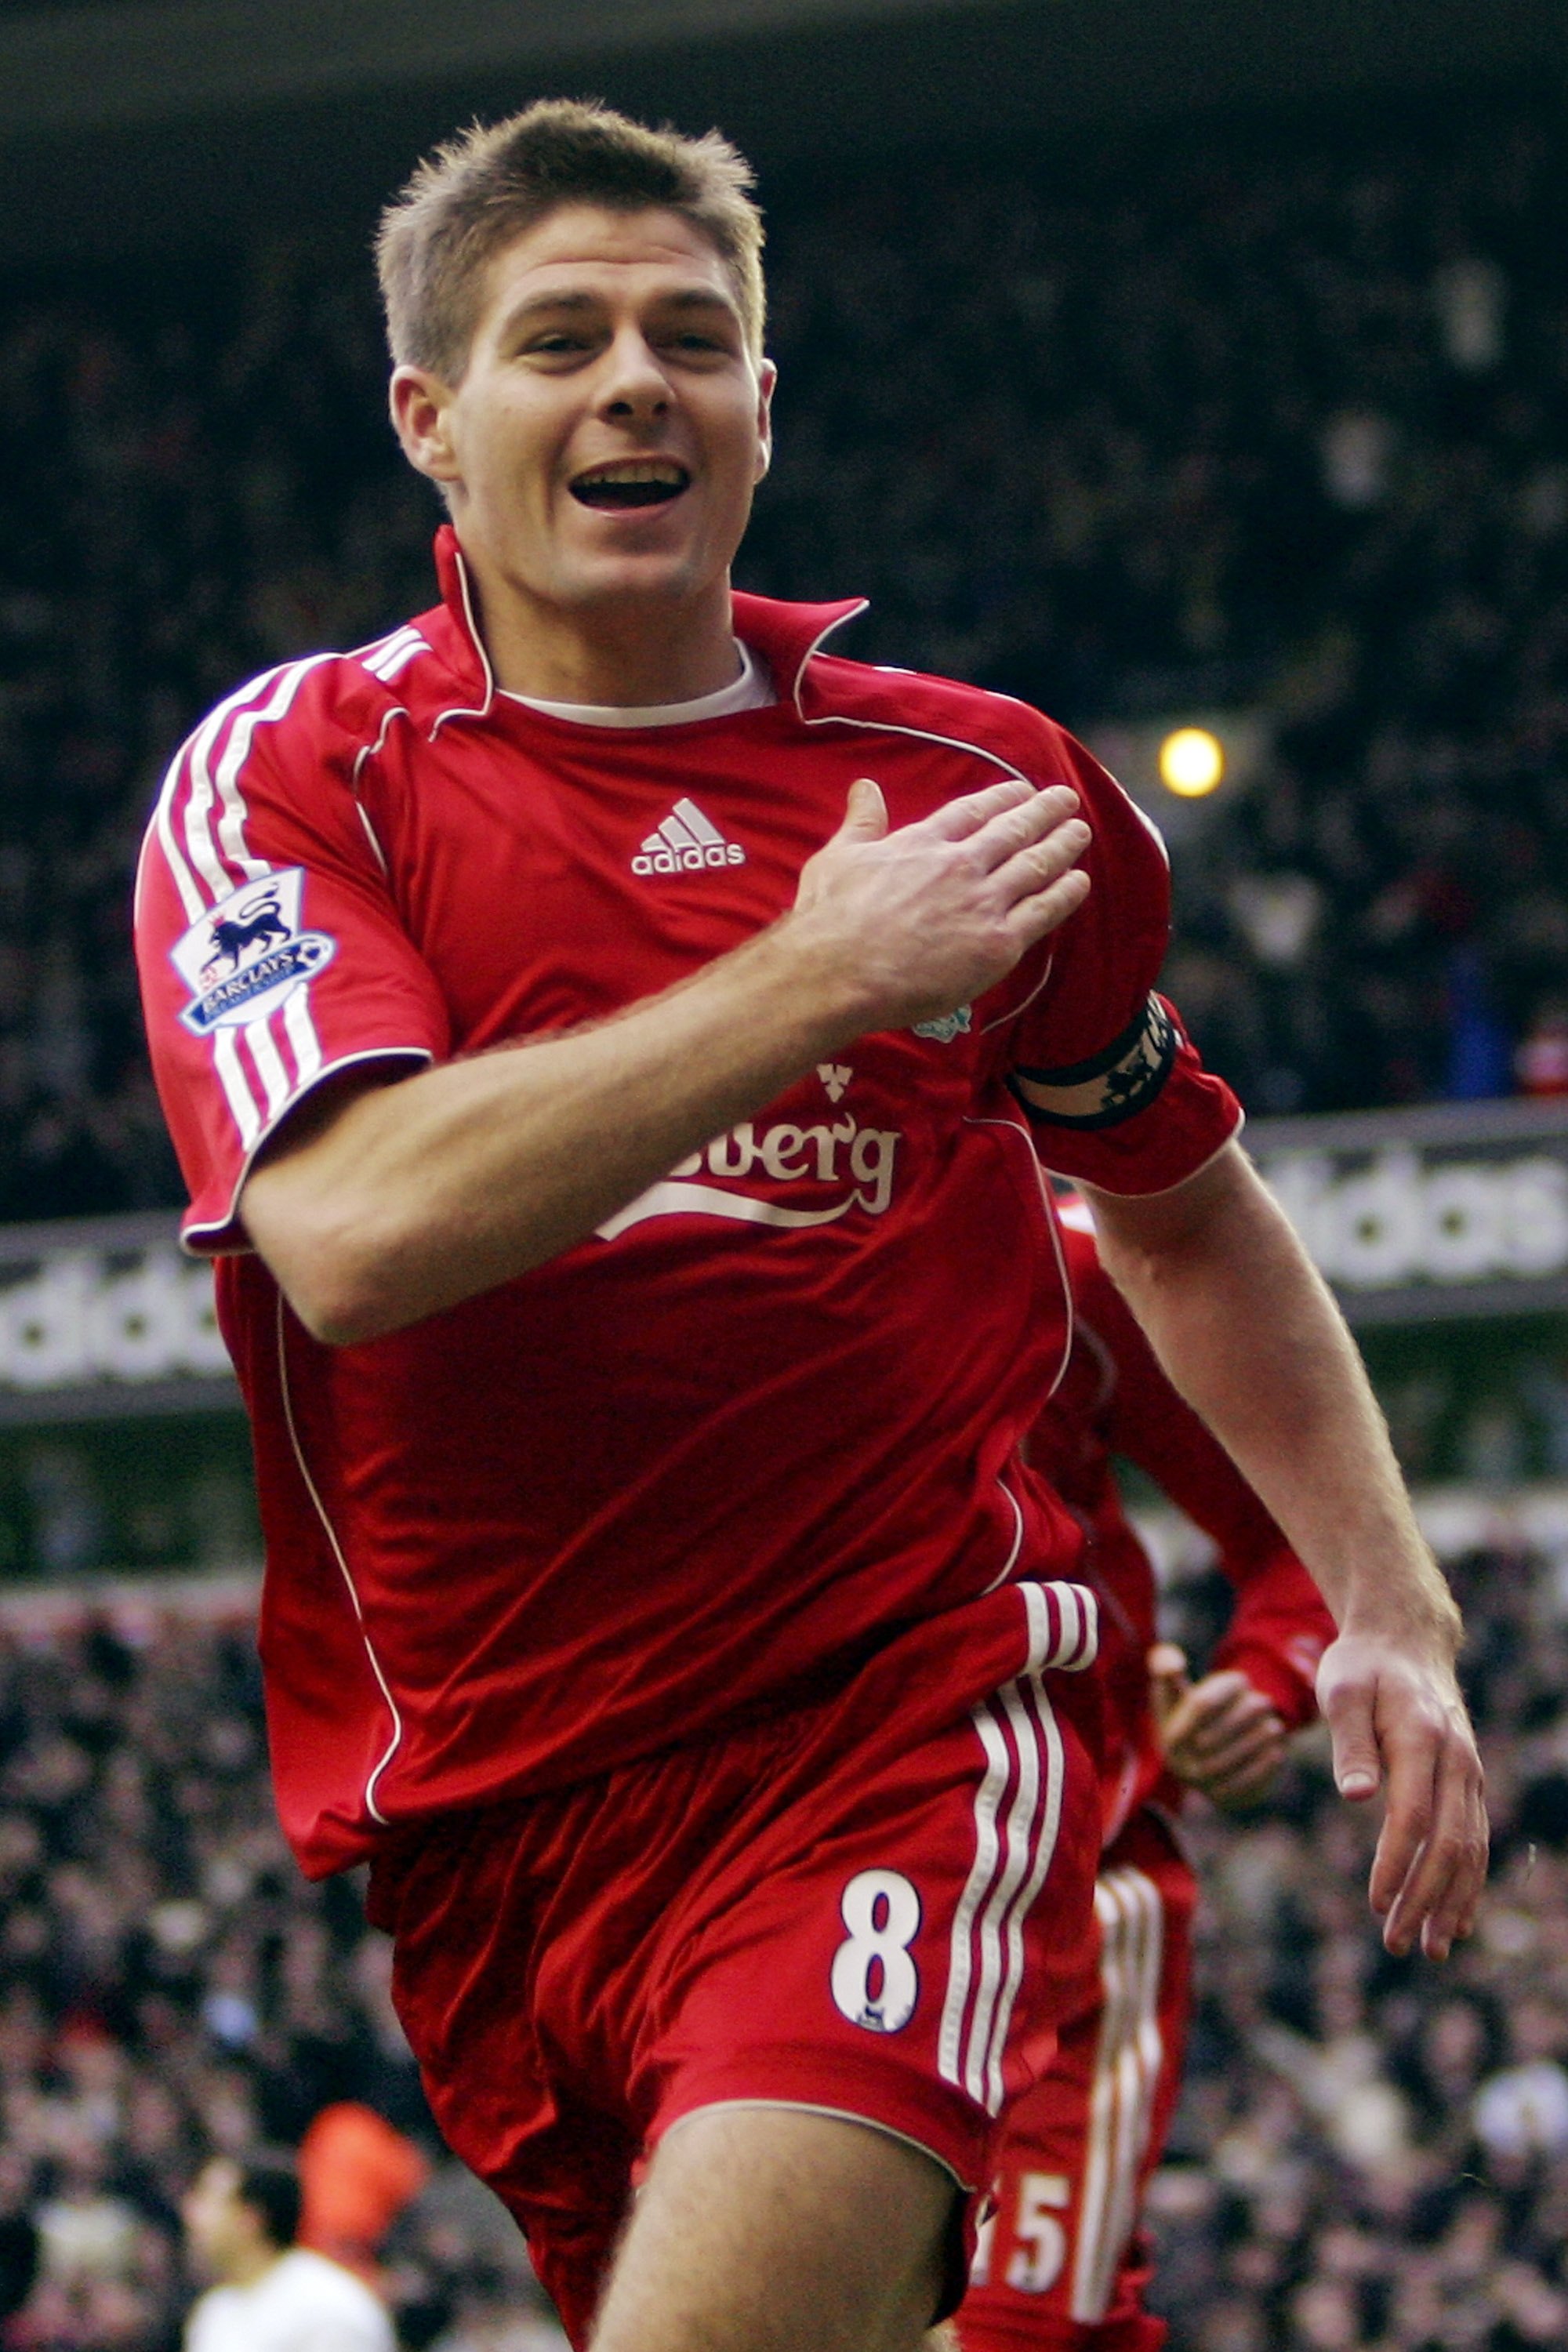 LIVERPOOL, UNITED KINGDOM - JANUARY 01:Steven Gerrard of Liverpool celebrates scoring the second goal during the Barclays Premiership match between Liverpool and Bolton Wanderers at Anfield on January 1, 2007 in Liverpool, England.  (Photo by Ross Kinnair